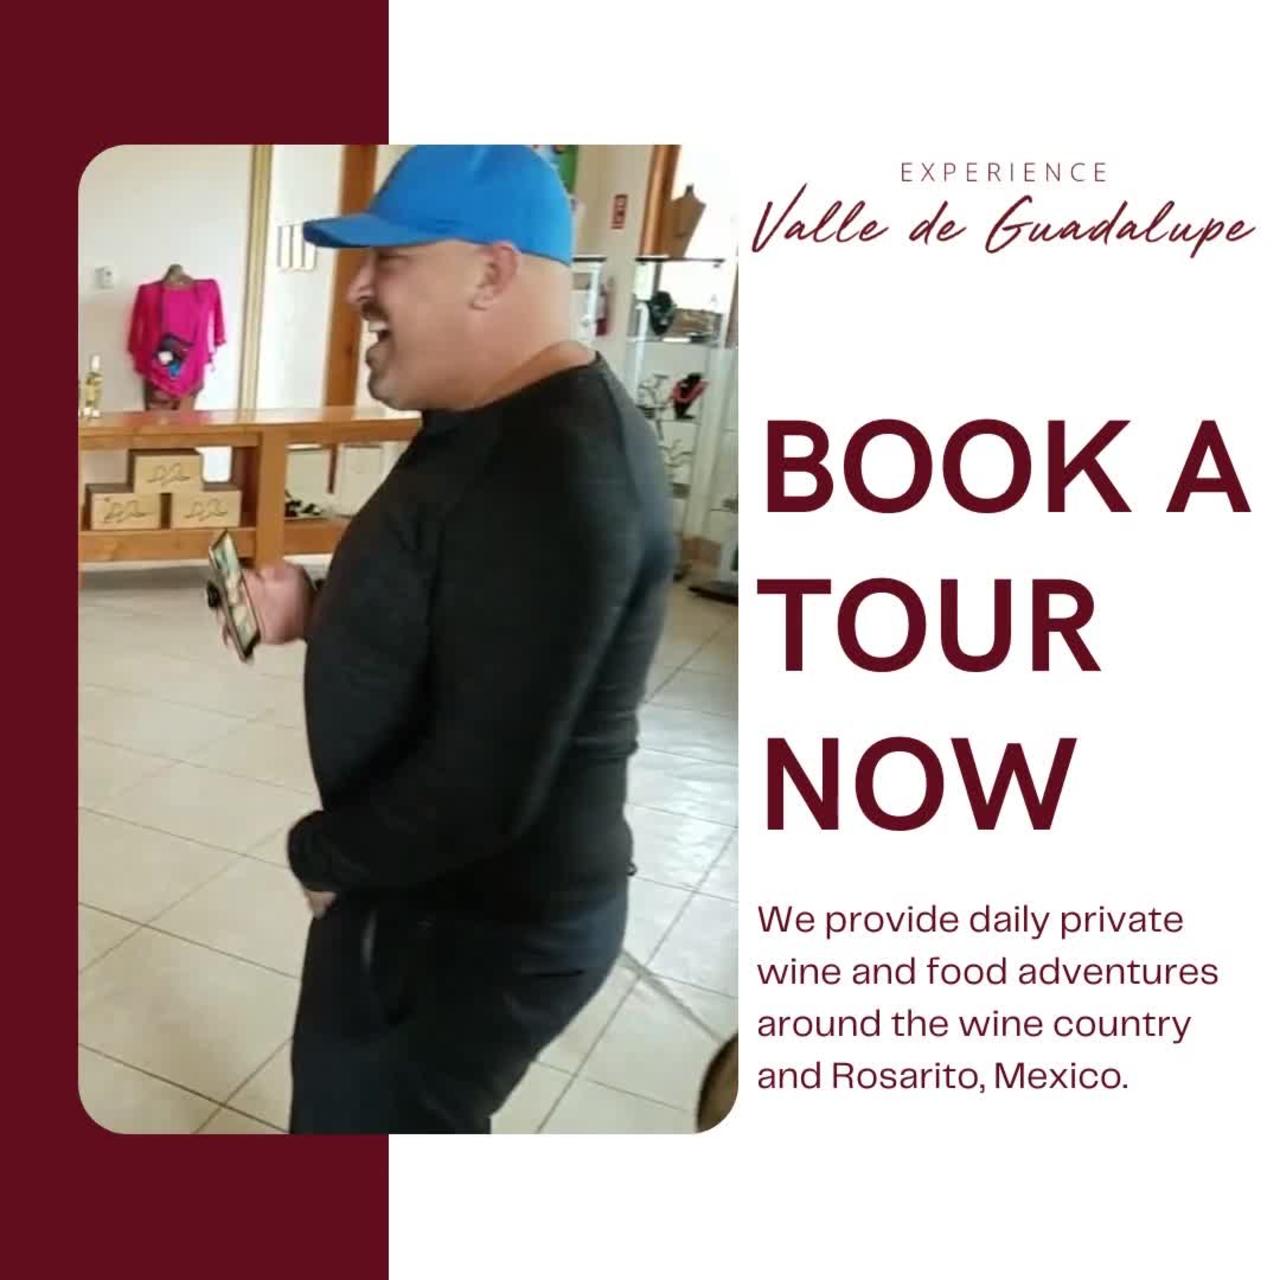 Try Valle de Guadalupe Amazing tour with Baja